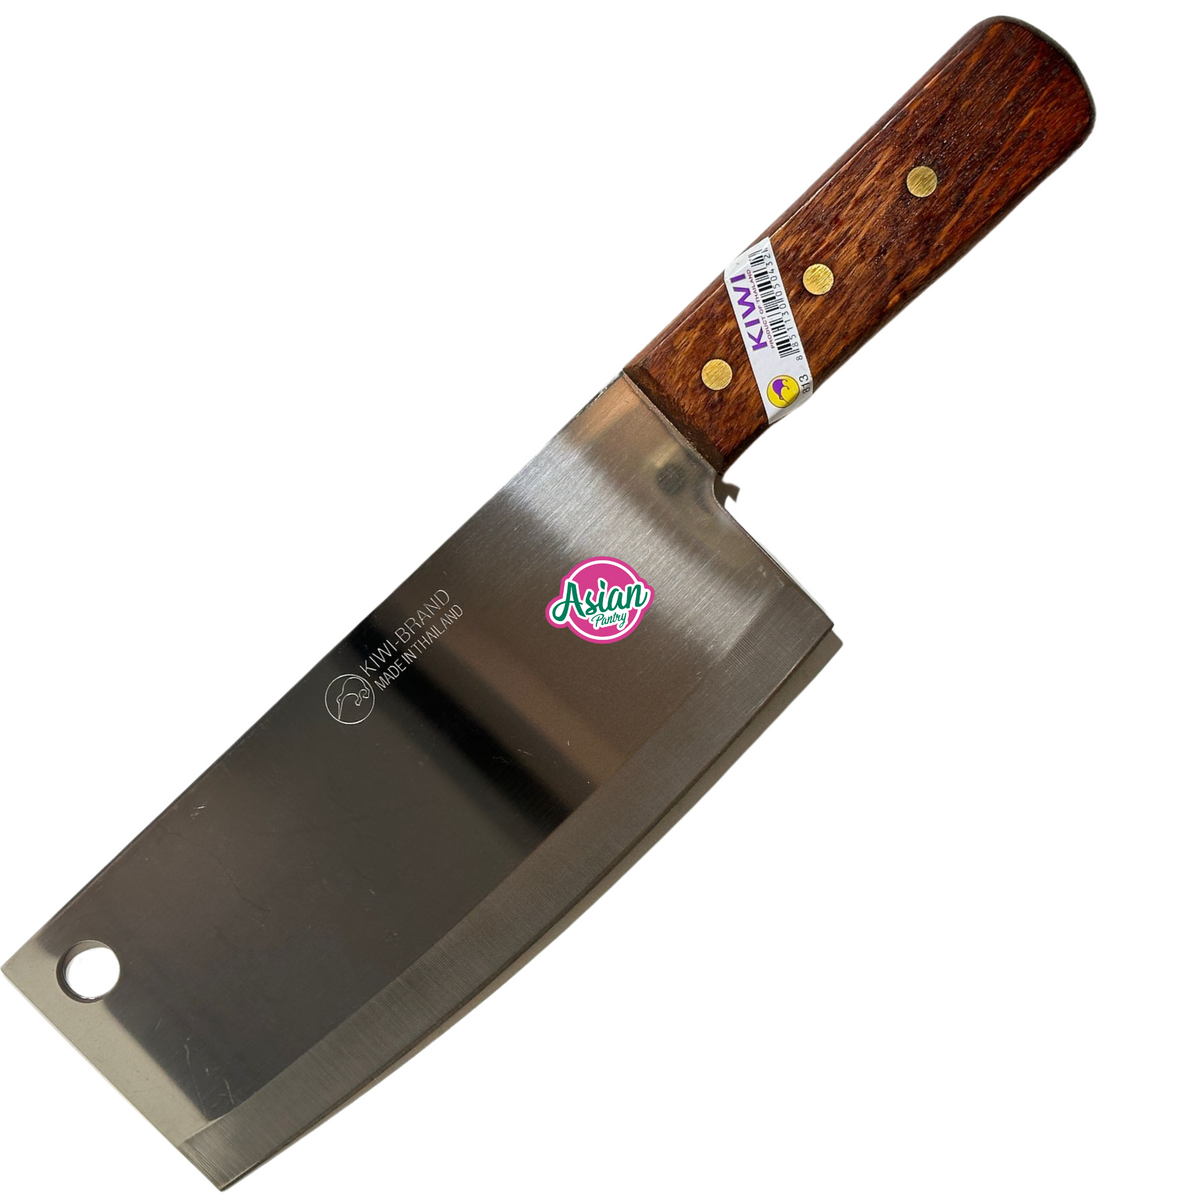 https://www.asianpantrys.shop/wp-content/uploads/1691/18/enjoy-big-savings-on-kiwi-brand-kitchen-knife-wooden-handle-813-kiwi-brand-benefit-from-the-finest-quality-and-services-at-low-costs_0.png